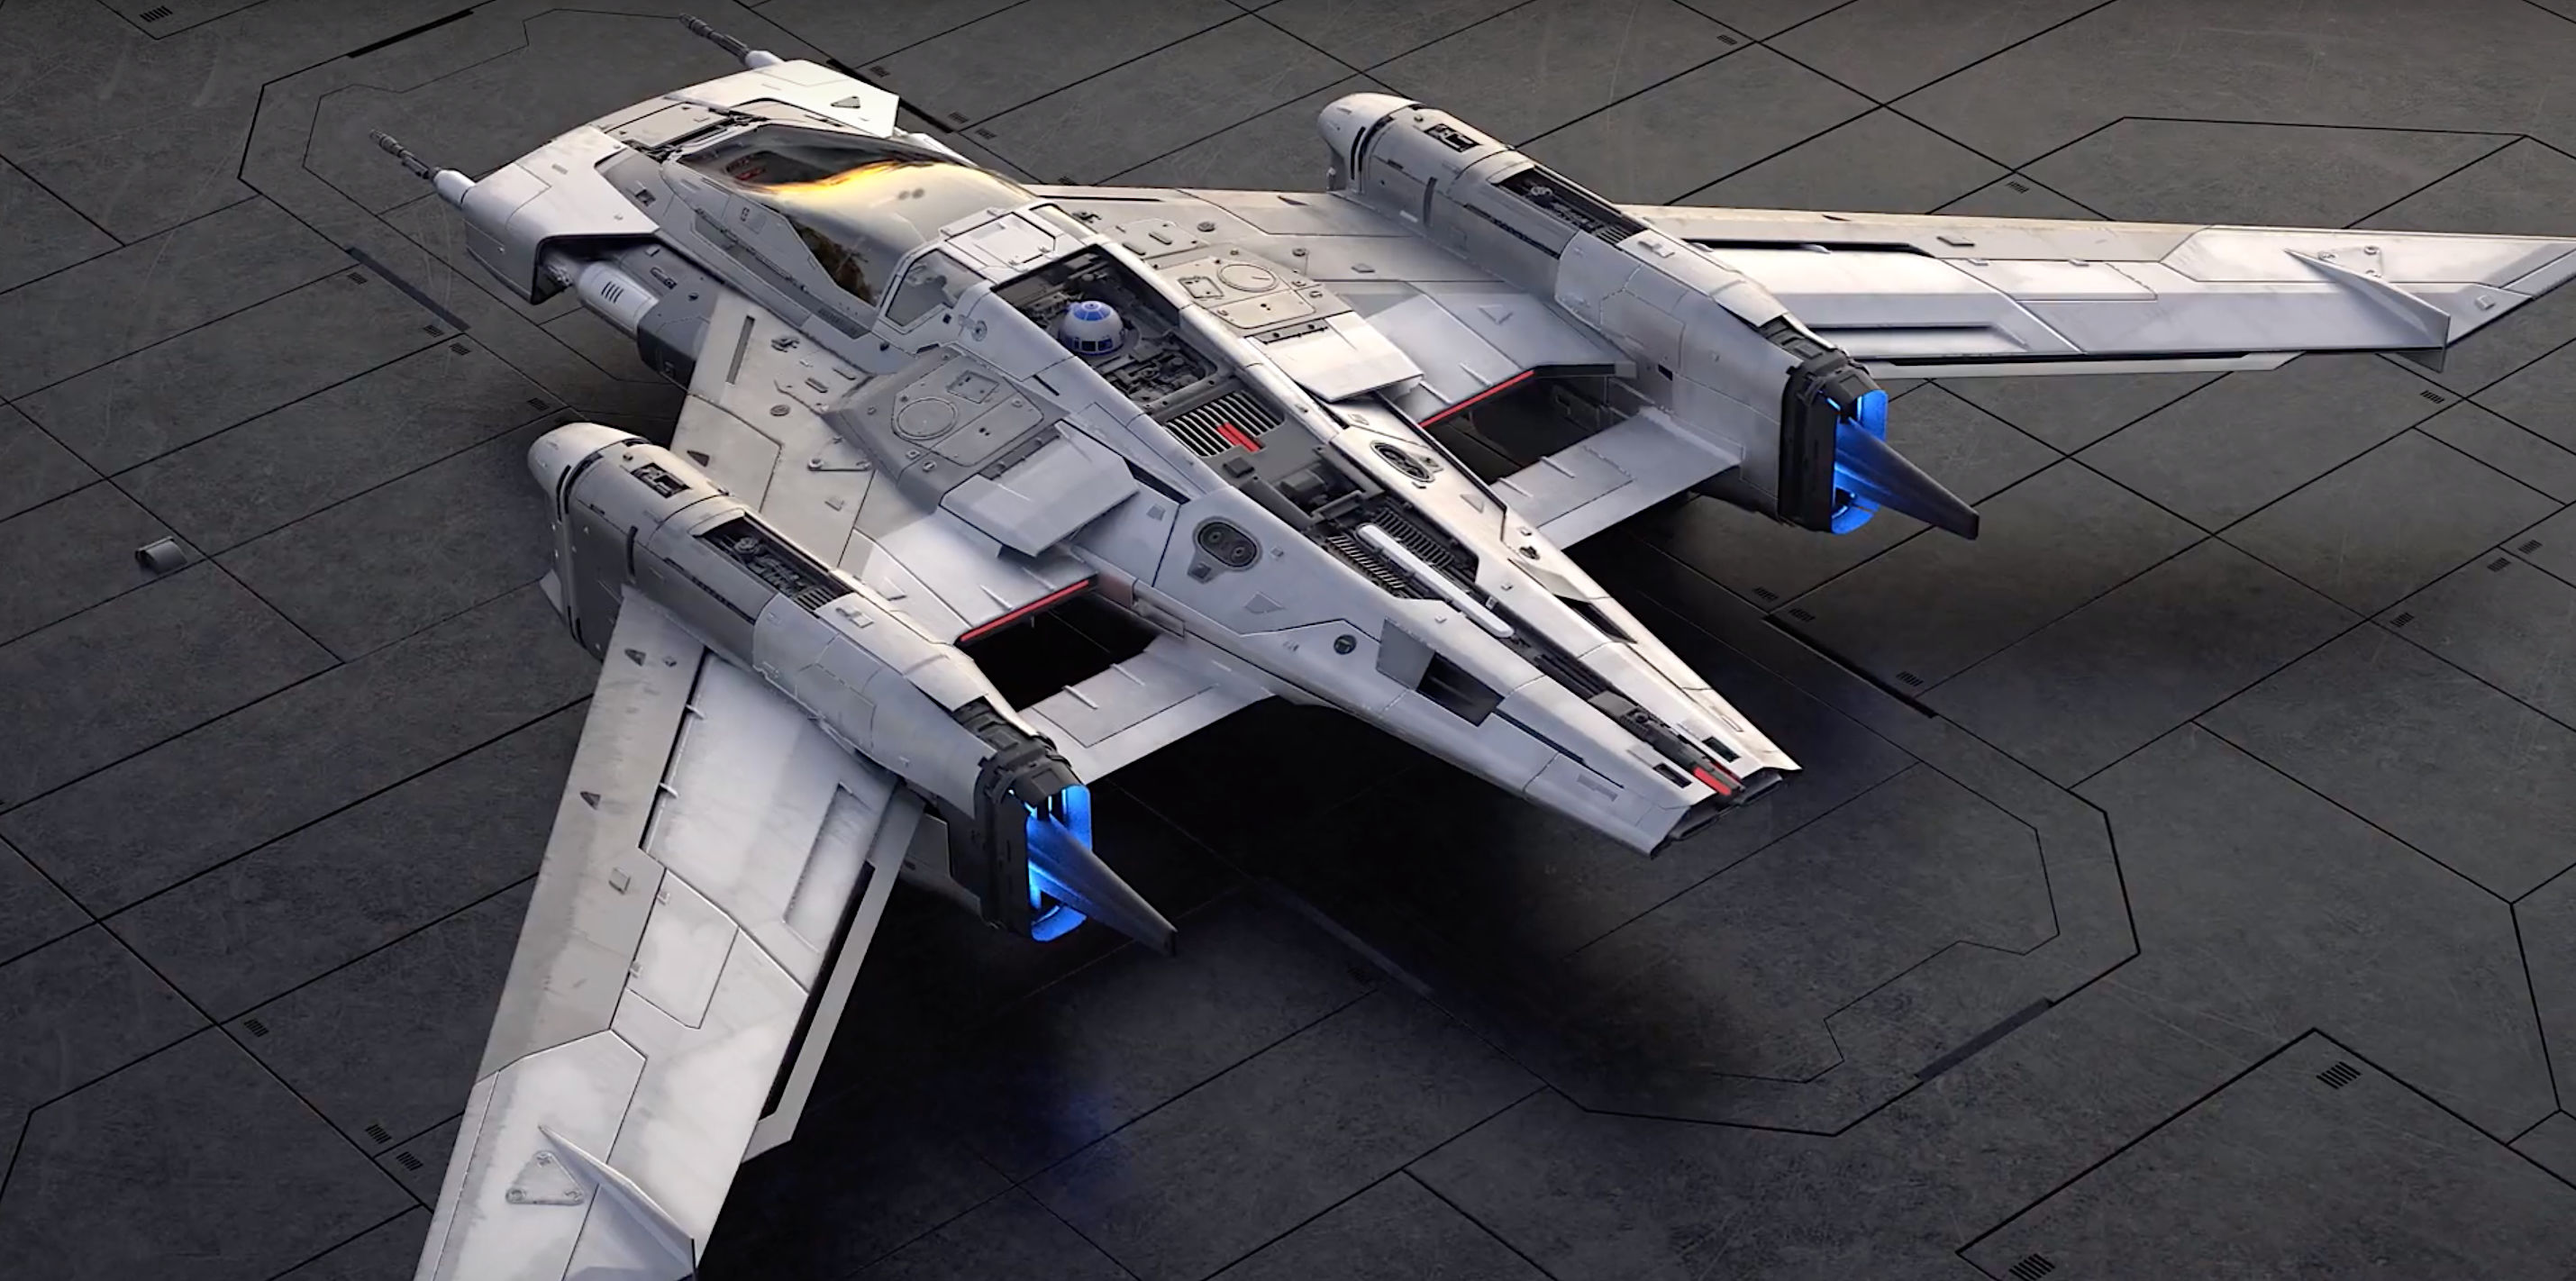 Pegasus Star Wars fighter designed by Porsche and Lucasfilm 